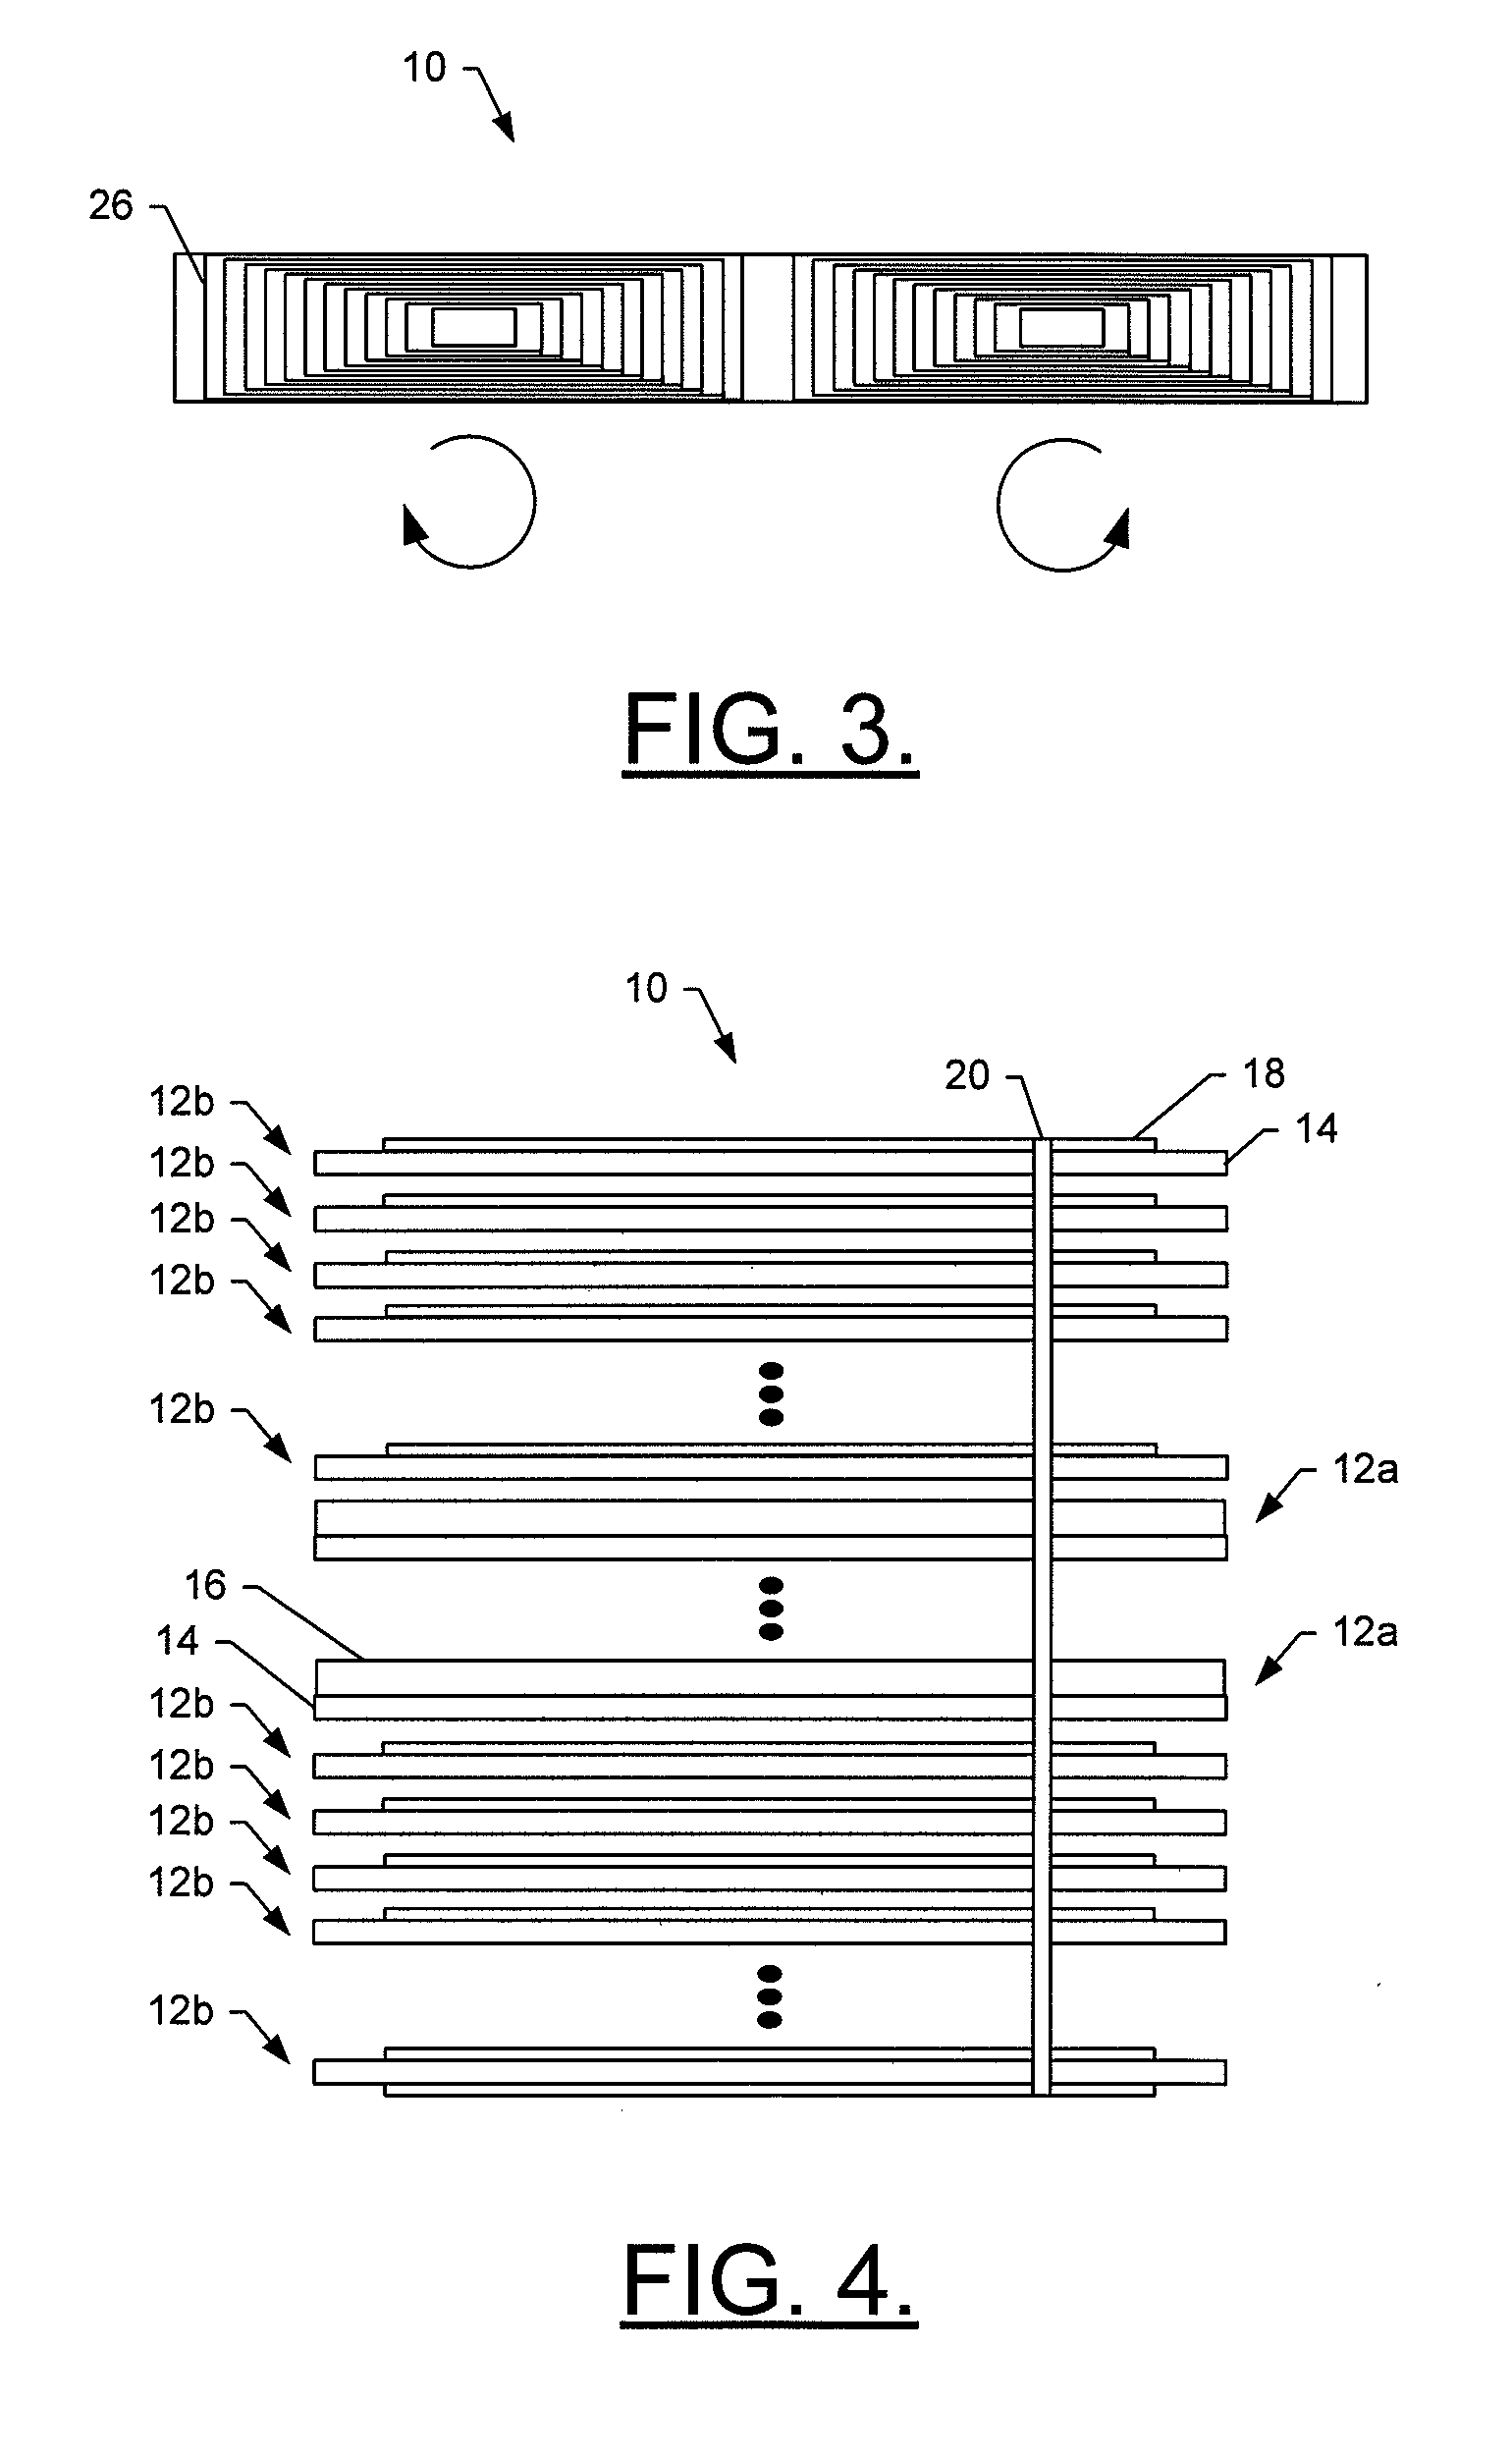 Printed circuit card-based proximity sensor and associated method of detecting a proximity of an object